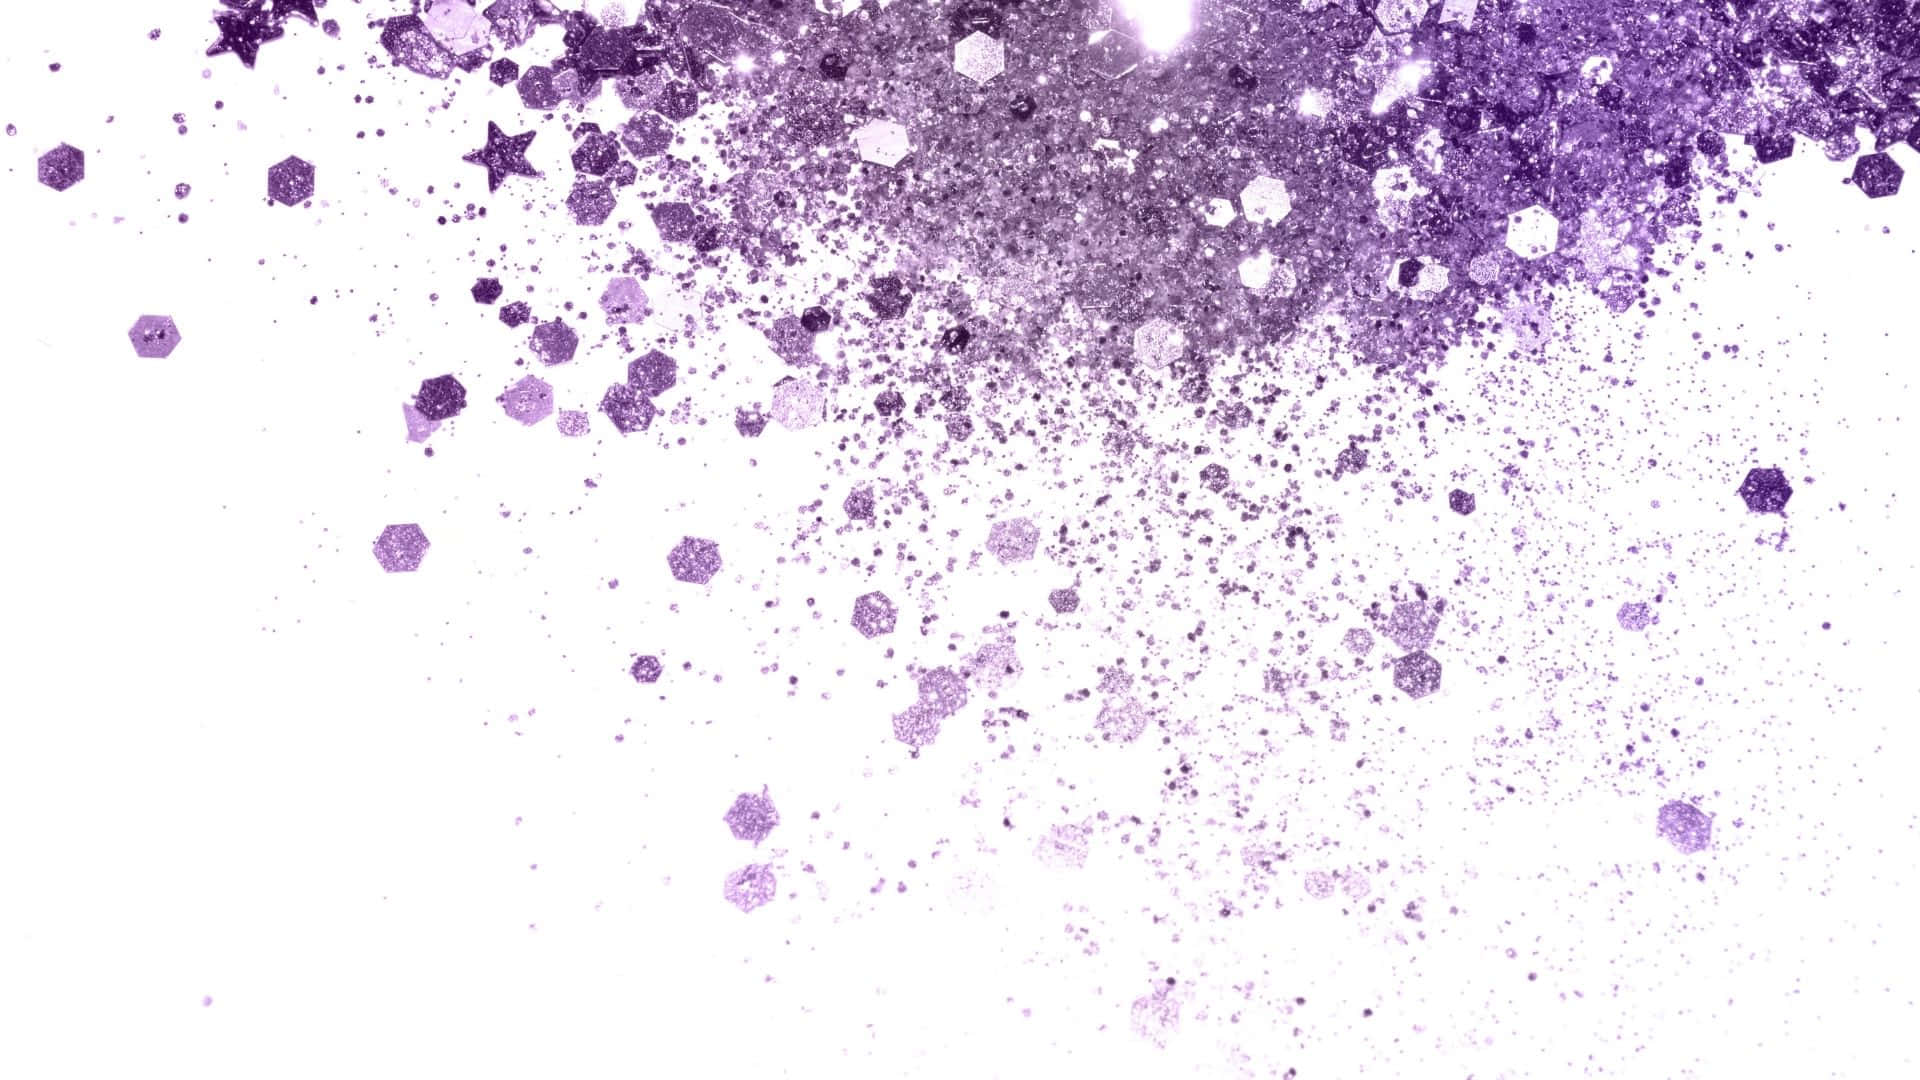 Show your sparkly side with Purple Glitter Wallpaper